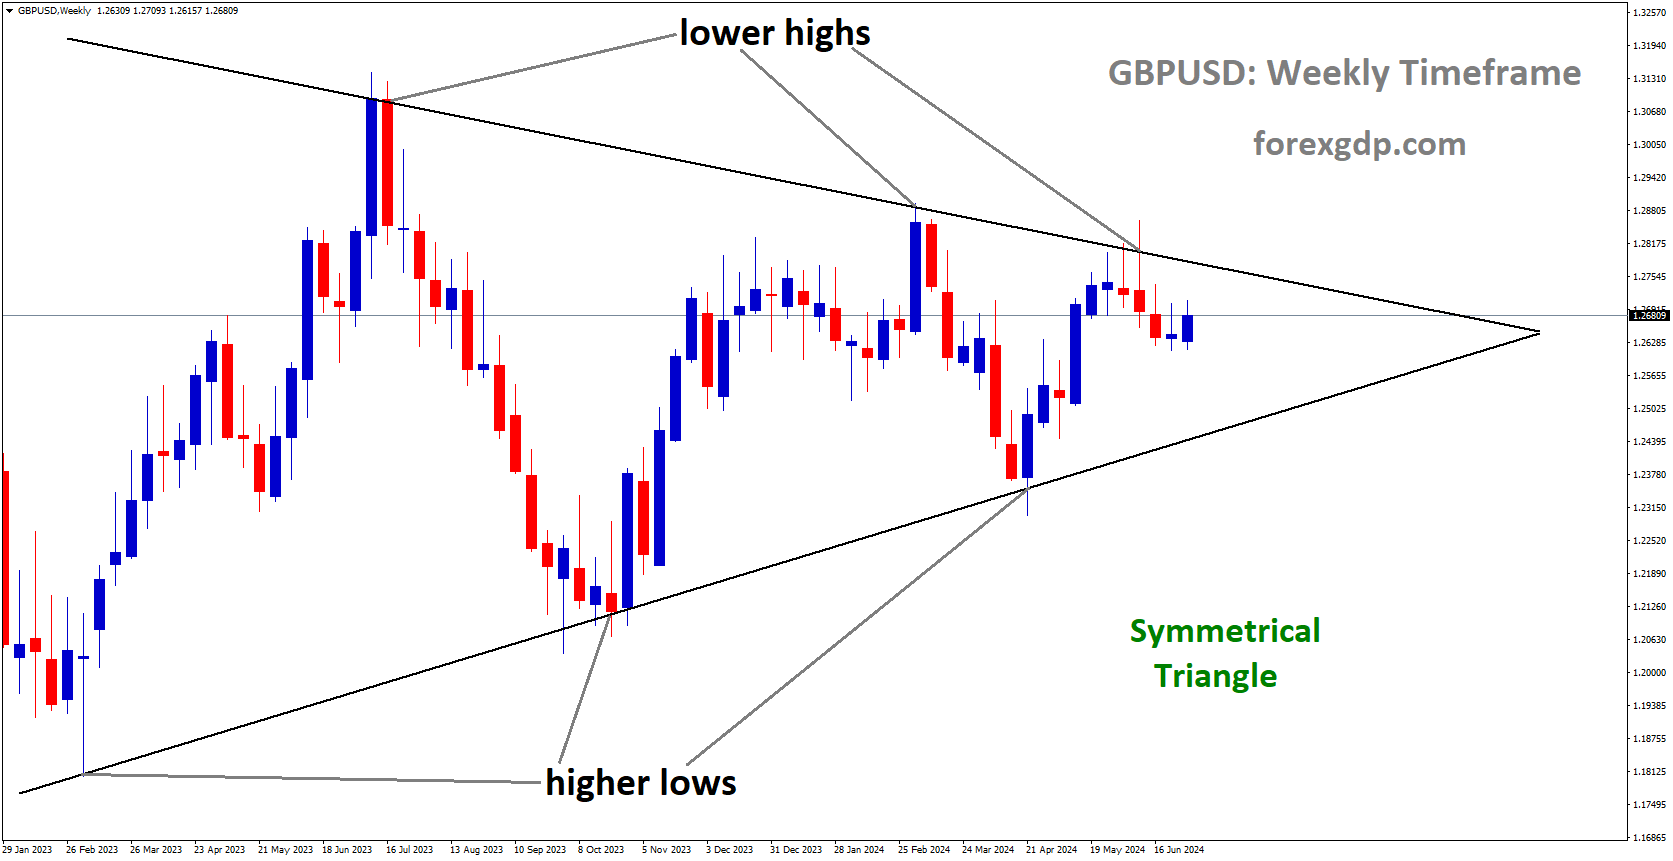 GBPUSD is moving in Symmetrical Triangle and market has fallen from the lower high area of the pattern